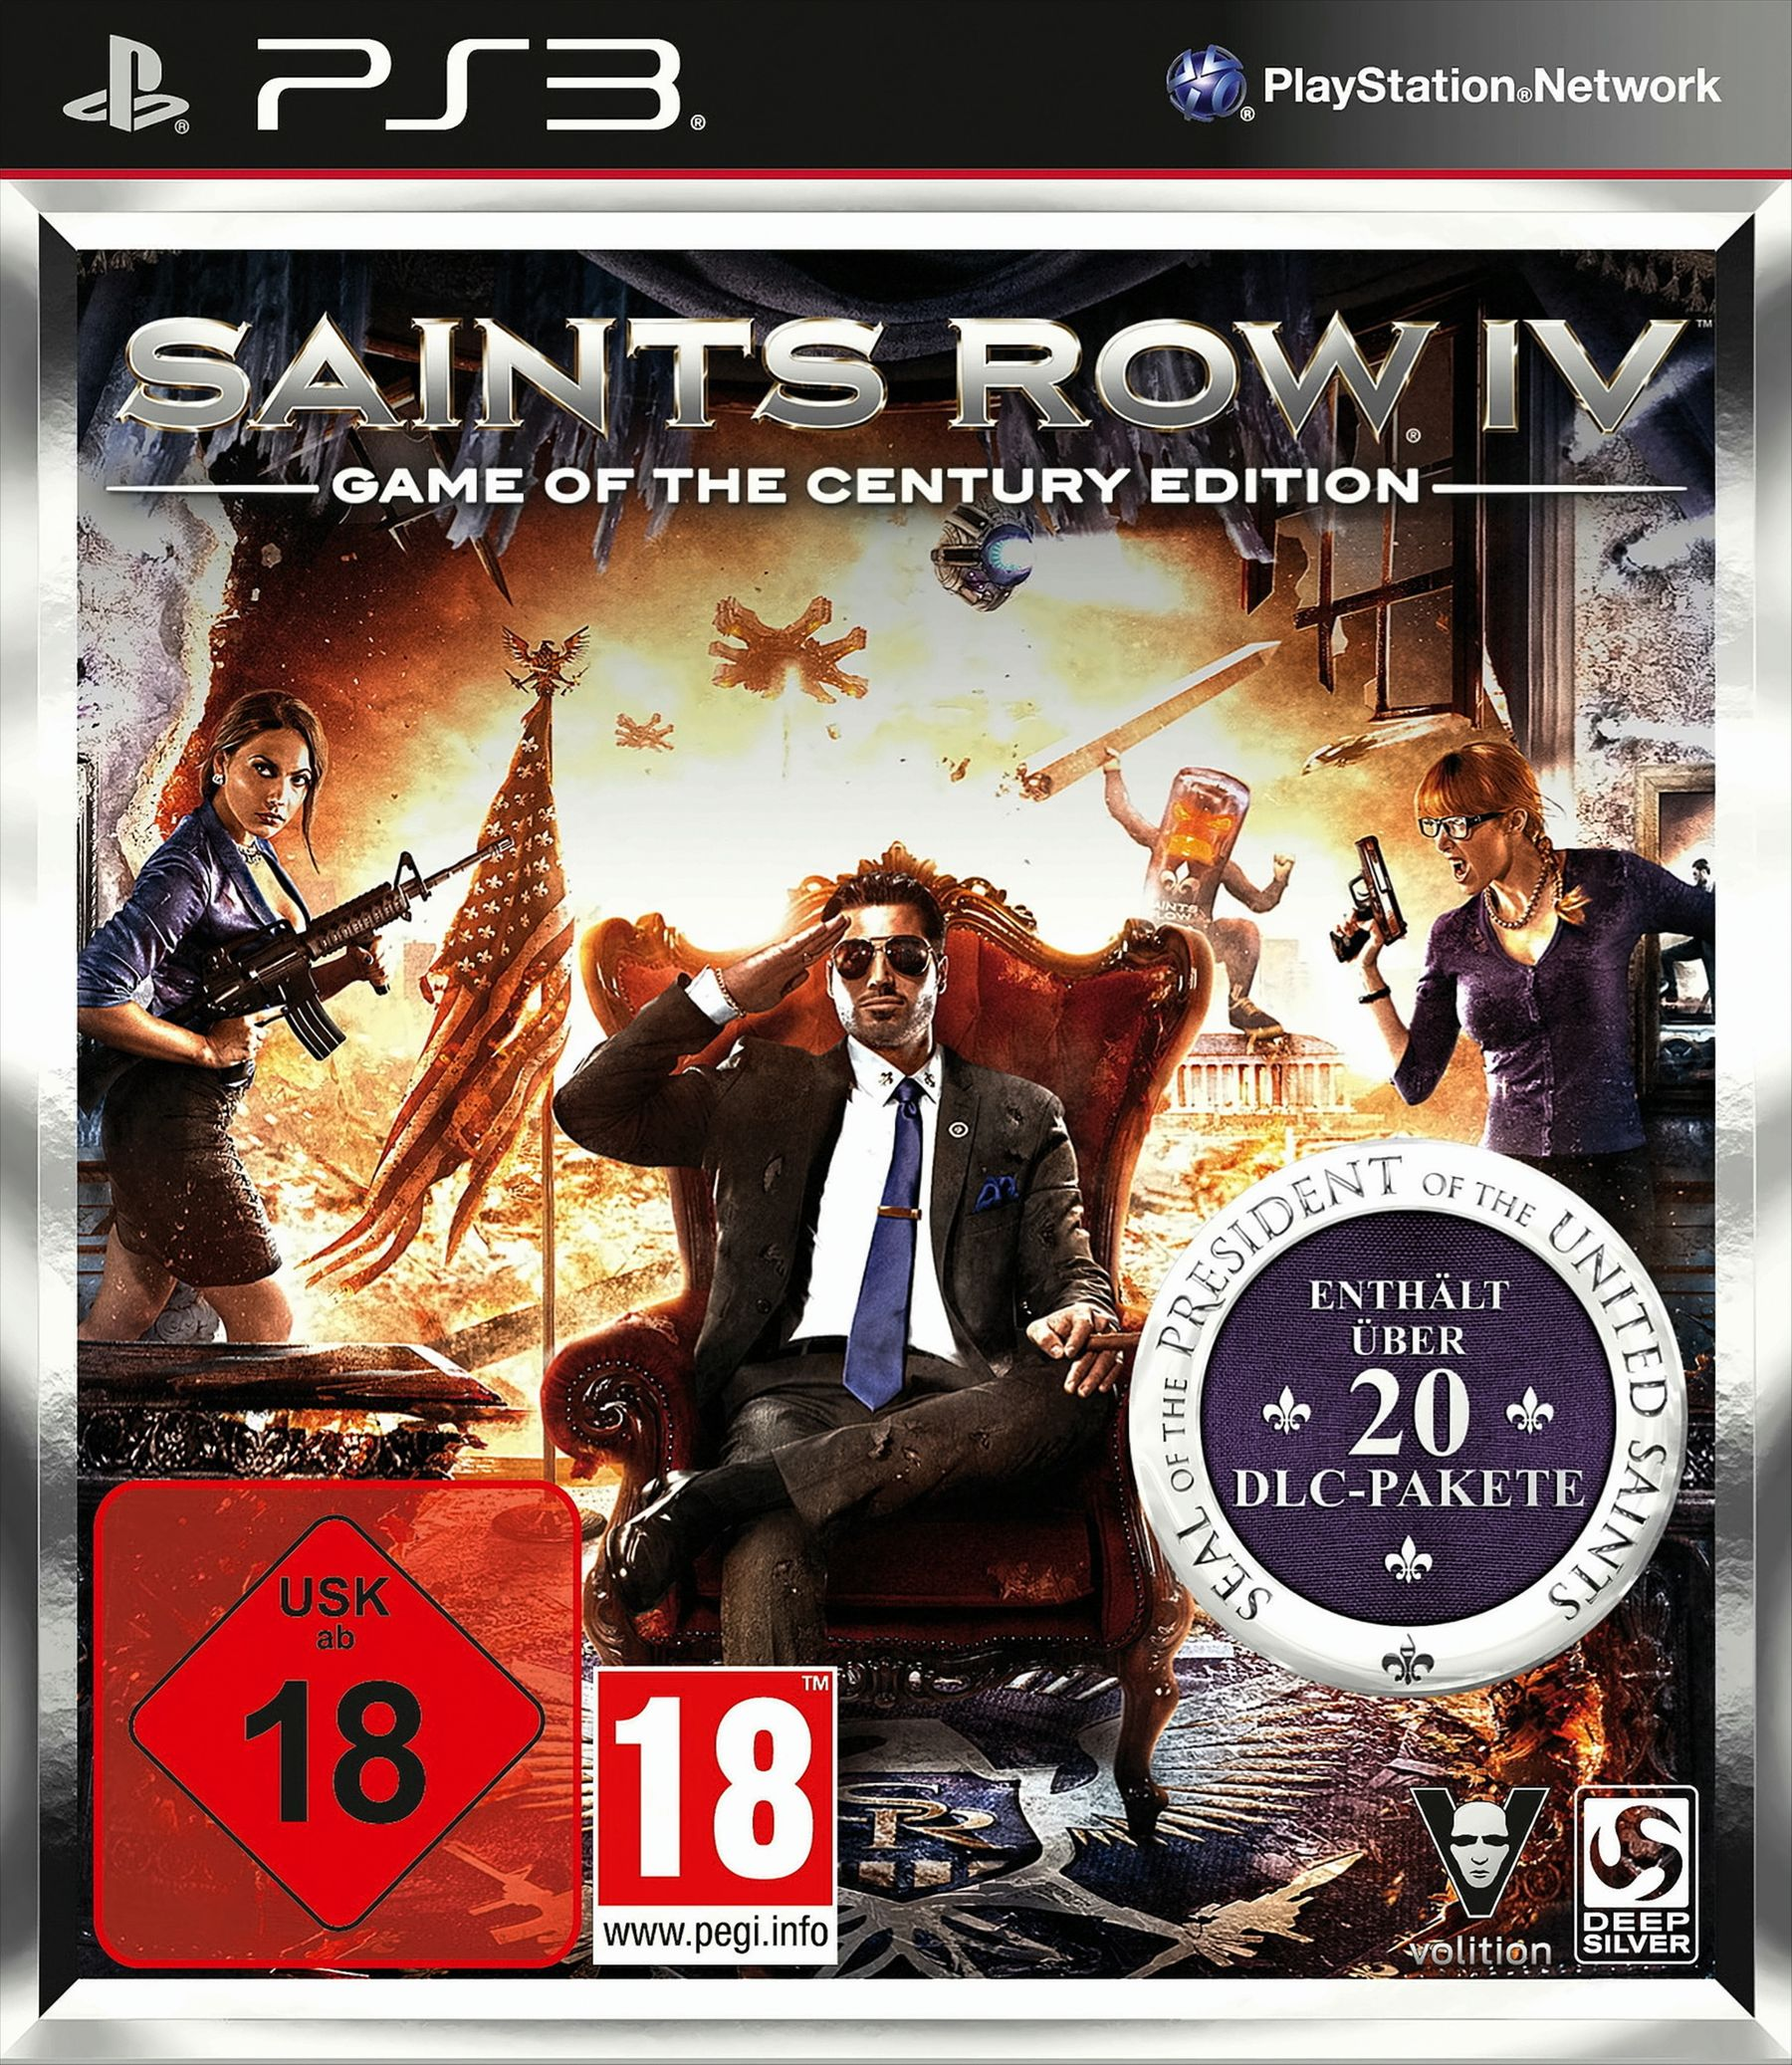 Edition - 3] Century The - Row [PlayStation IV Saints Of Game